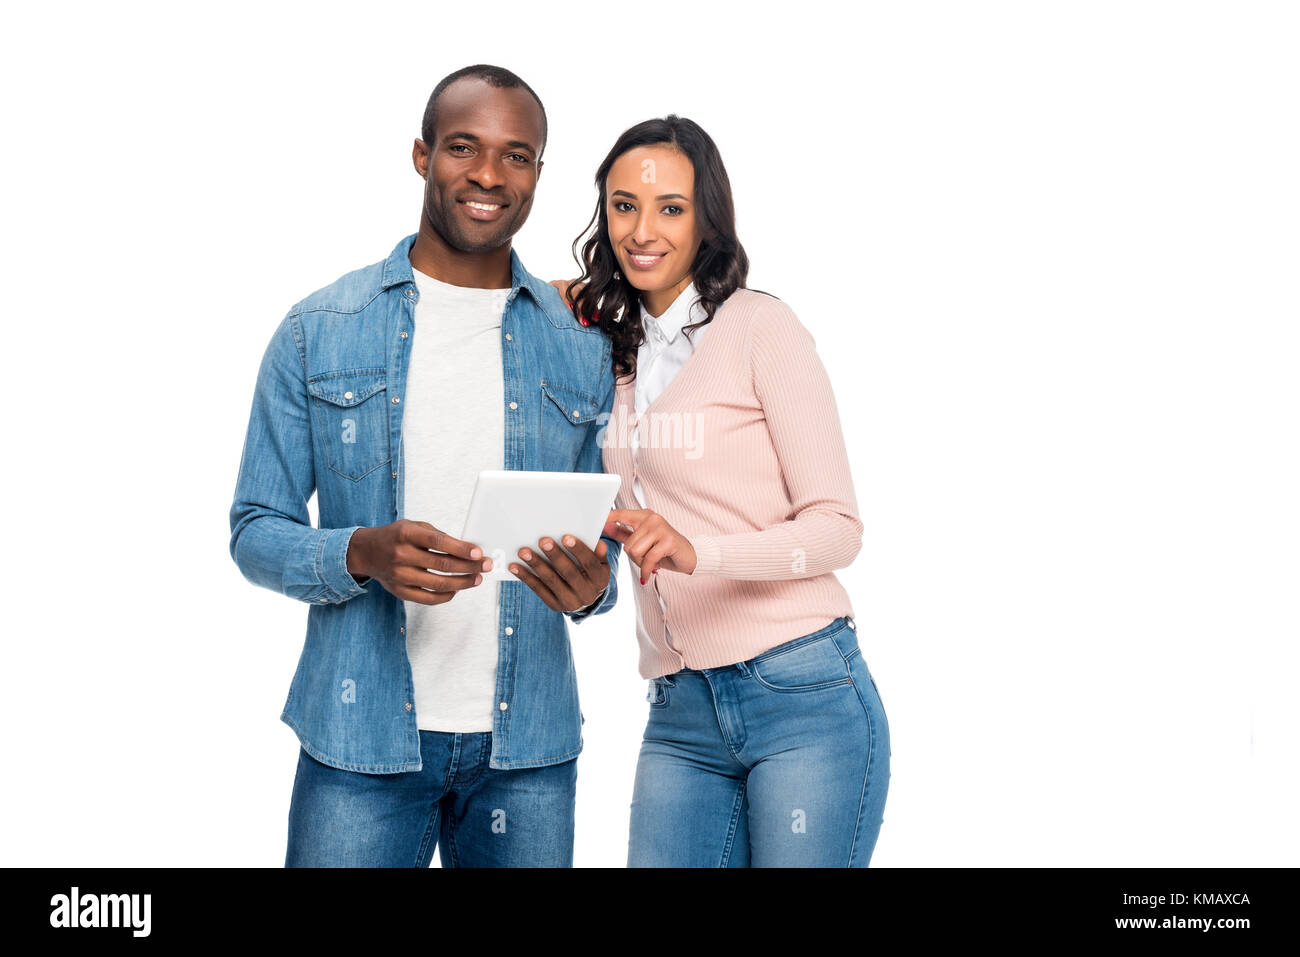 African American couple with digital tablet Banque D'Images